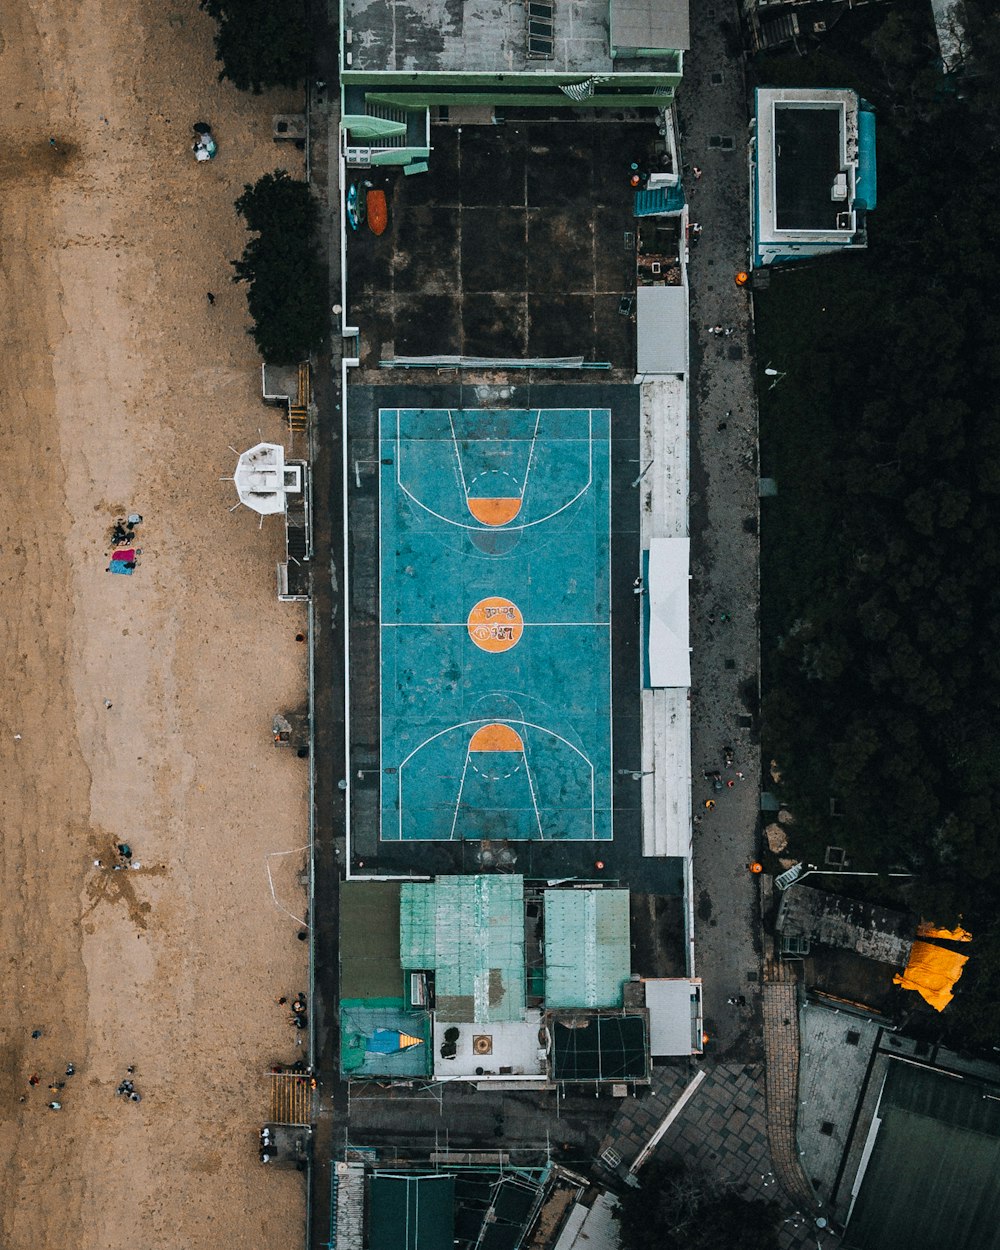 an aerial view of a basketball court in a parking lot